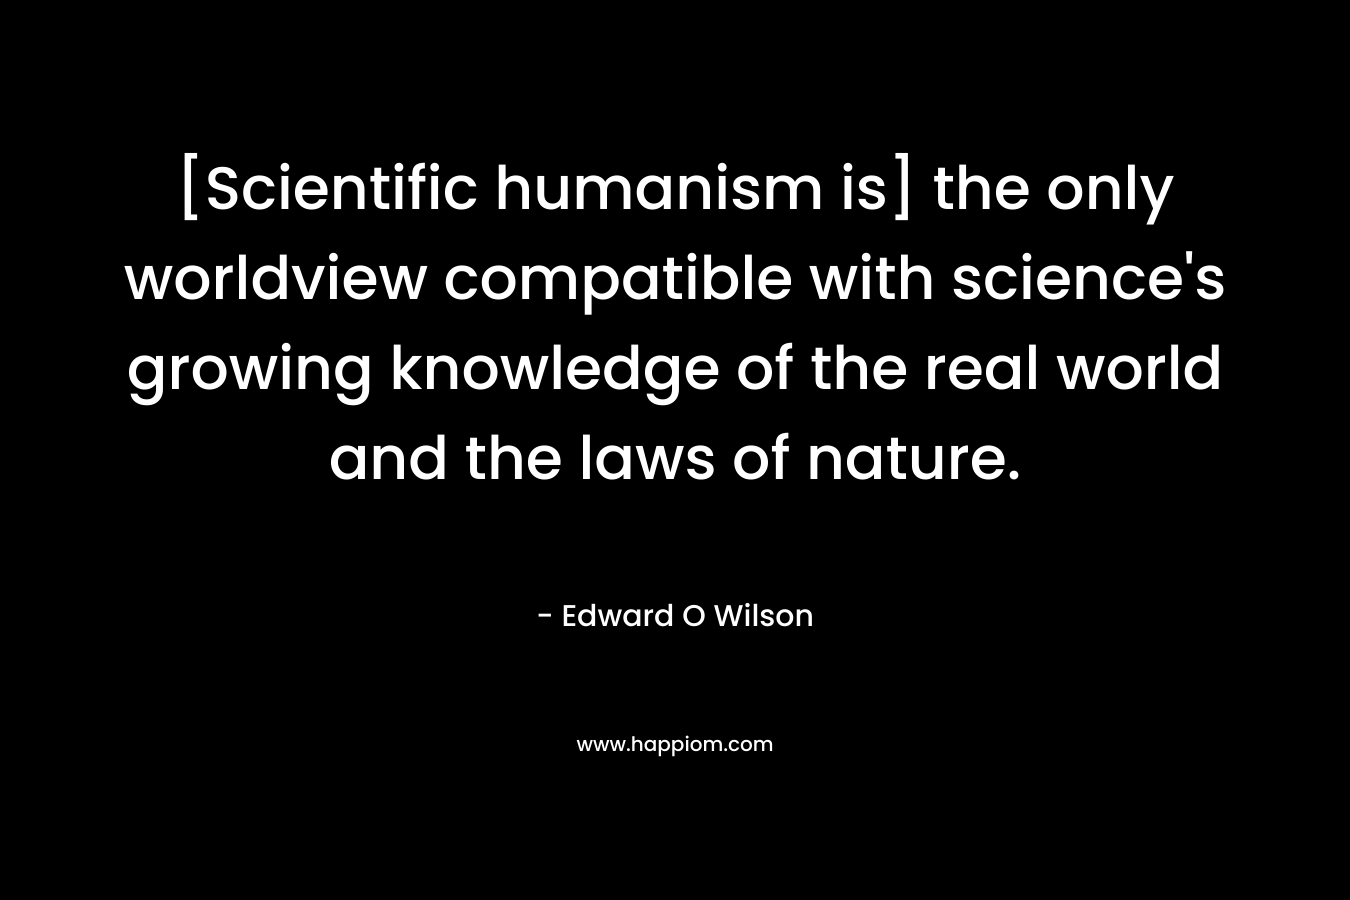 [Scientific humanism is] the only worldview compatible with science's growing knowledge of the real world and the laws of nature.